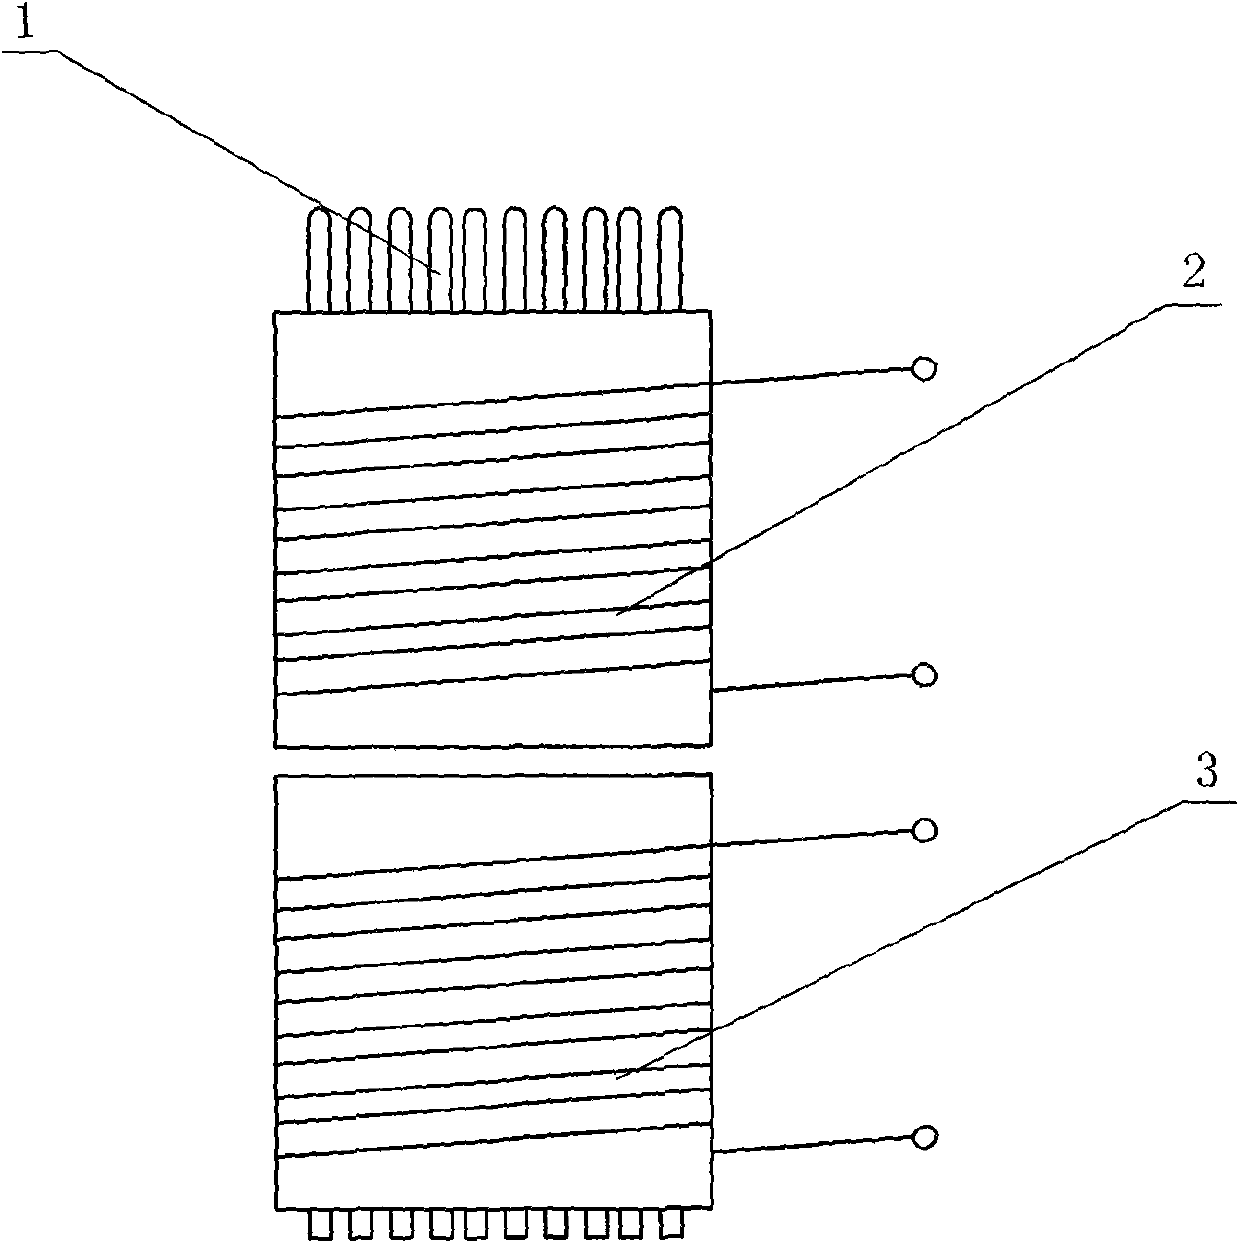 Reinforced electromagnetic therapeutic apparatus with superimposed magnetic fields